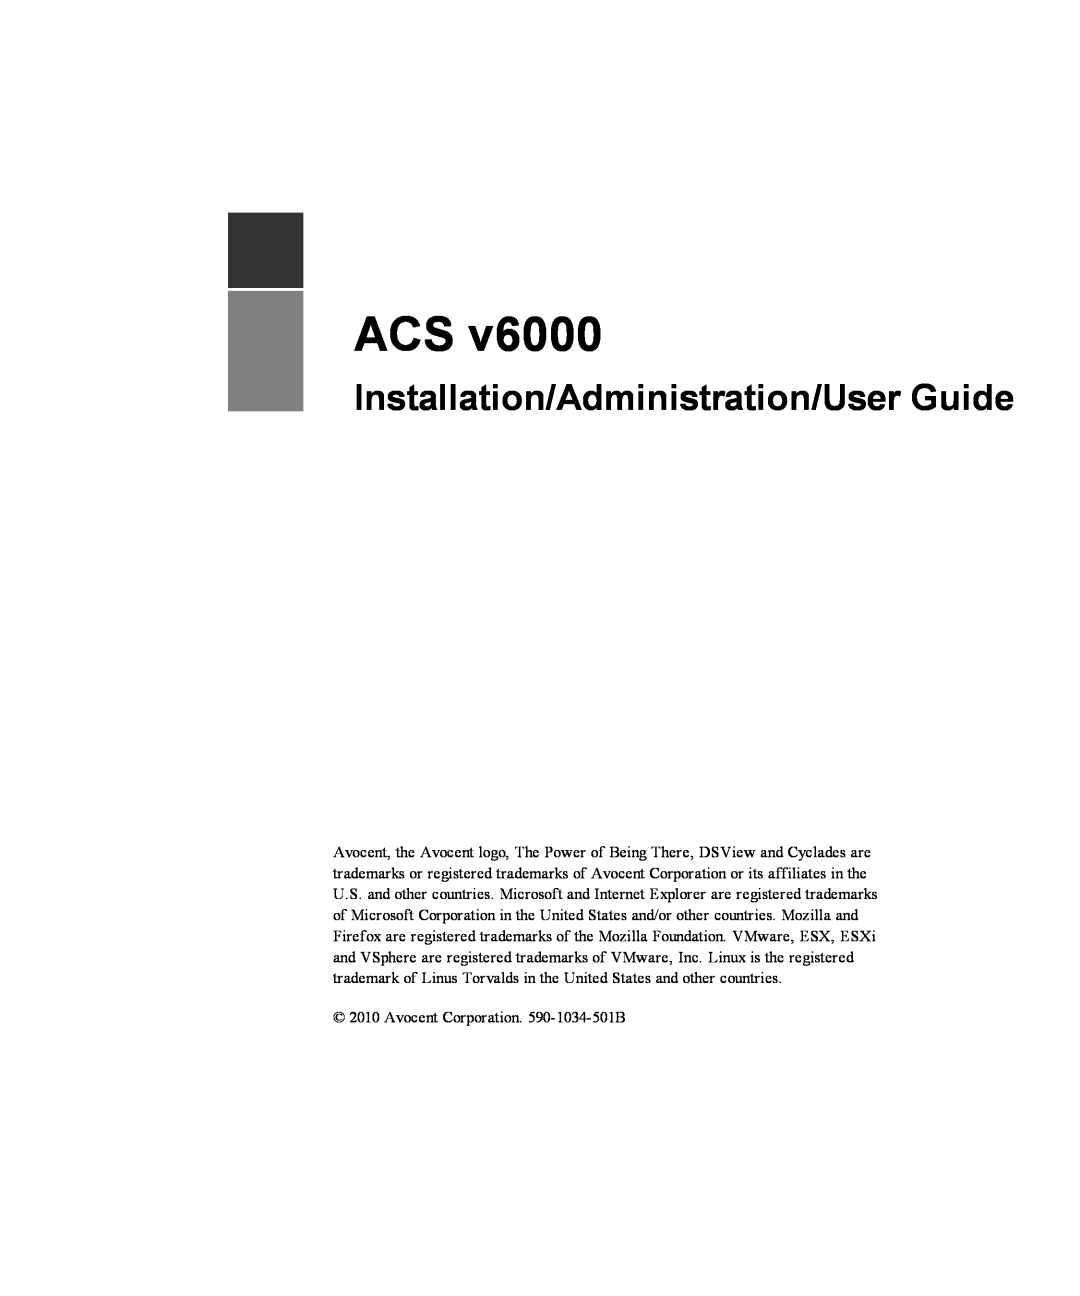 Casio ACS V6000 manual Installation/Administration/User Guide, Avocent Corporation. 590-1034-501B 